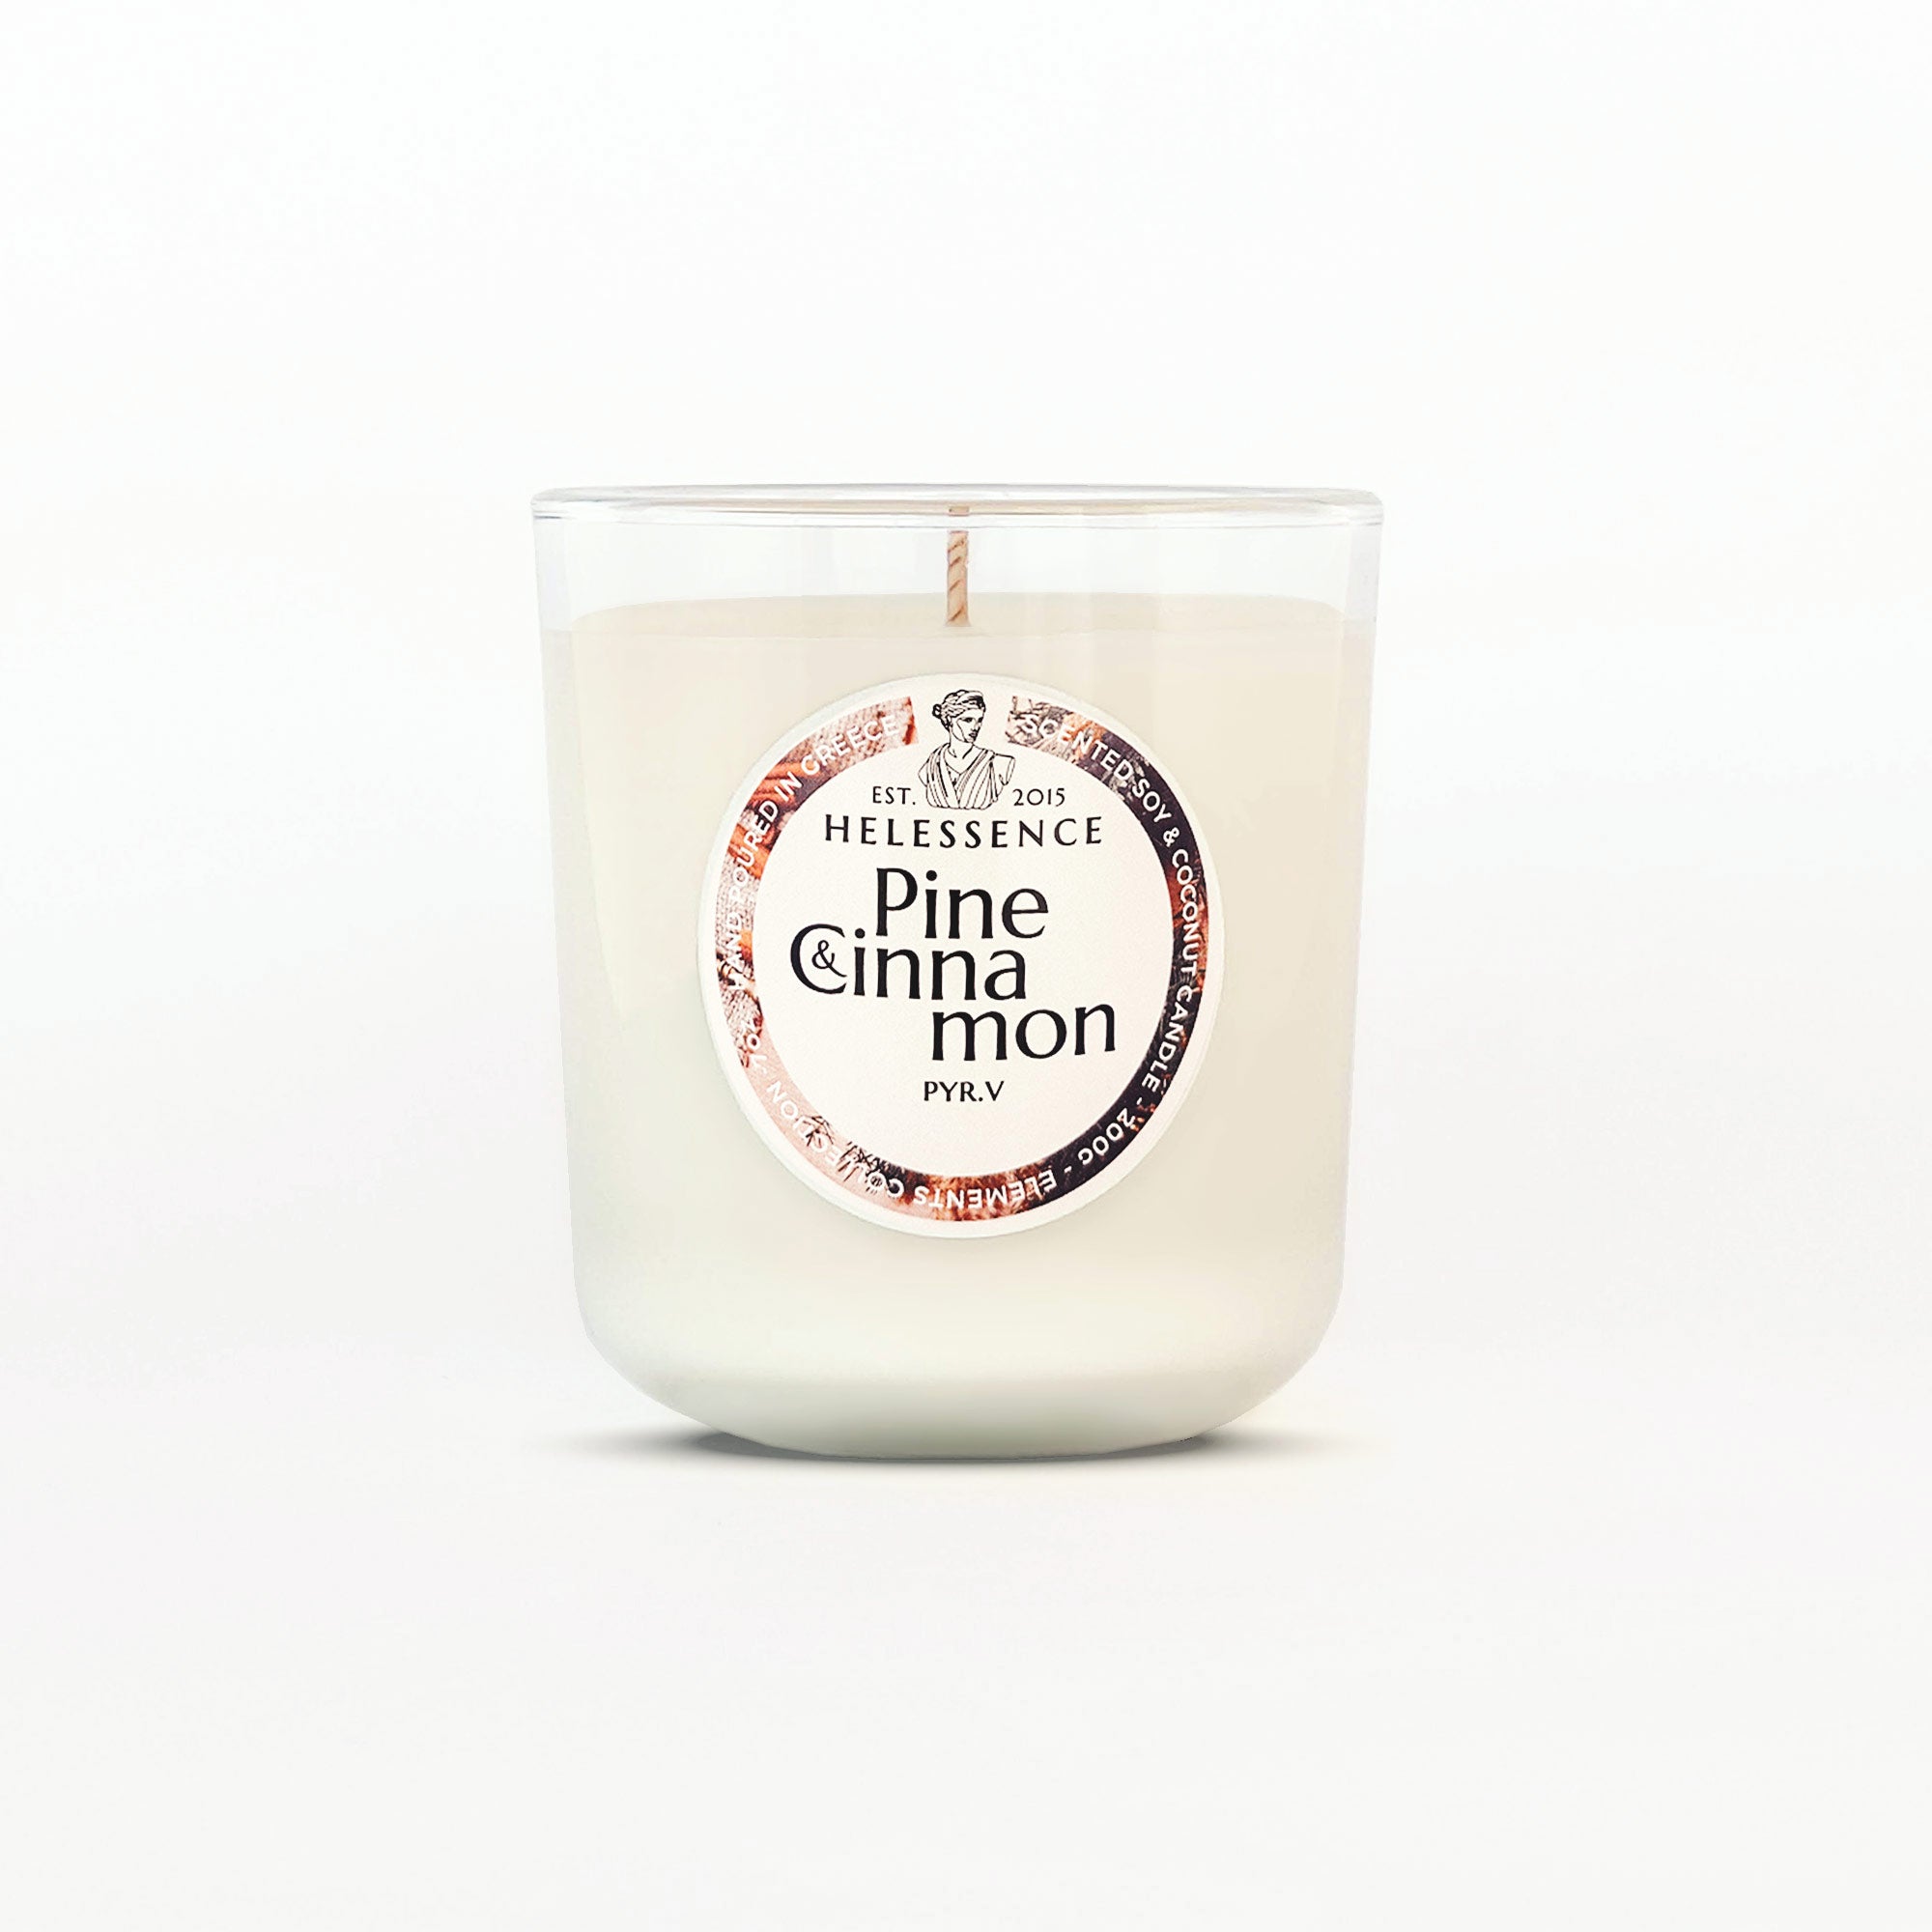 Pine & Cinnamon Scented Candle